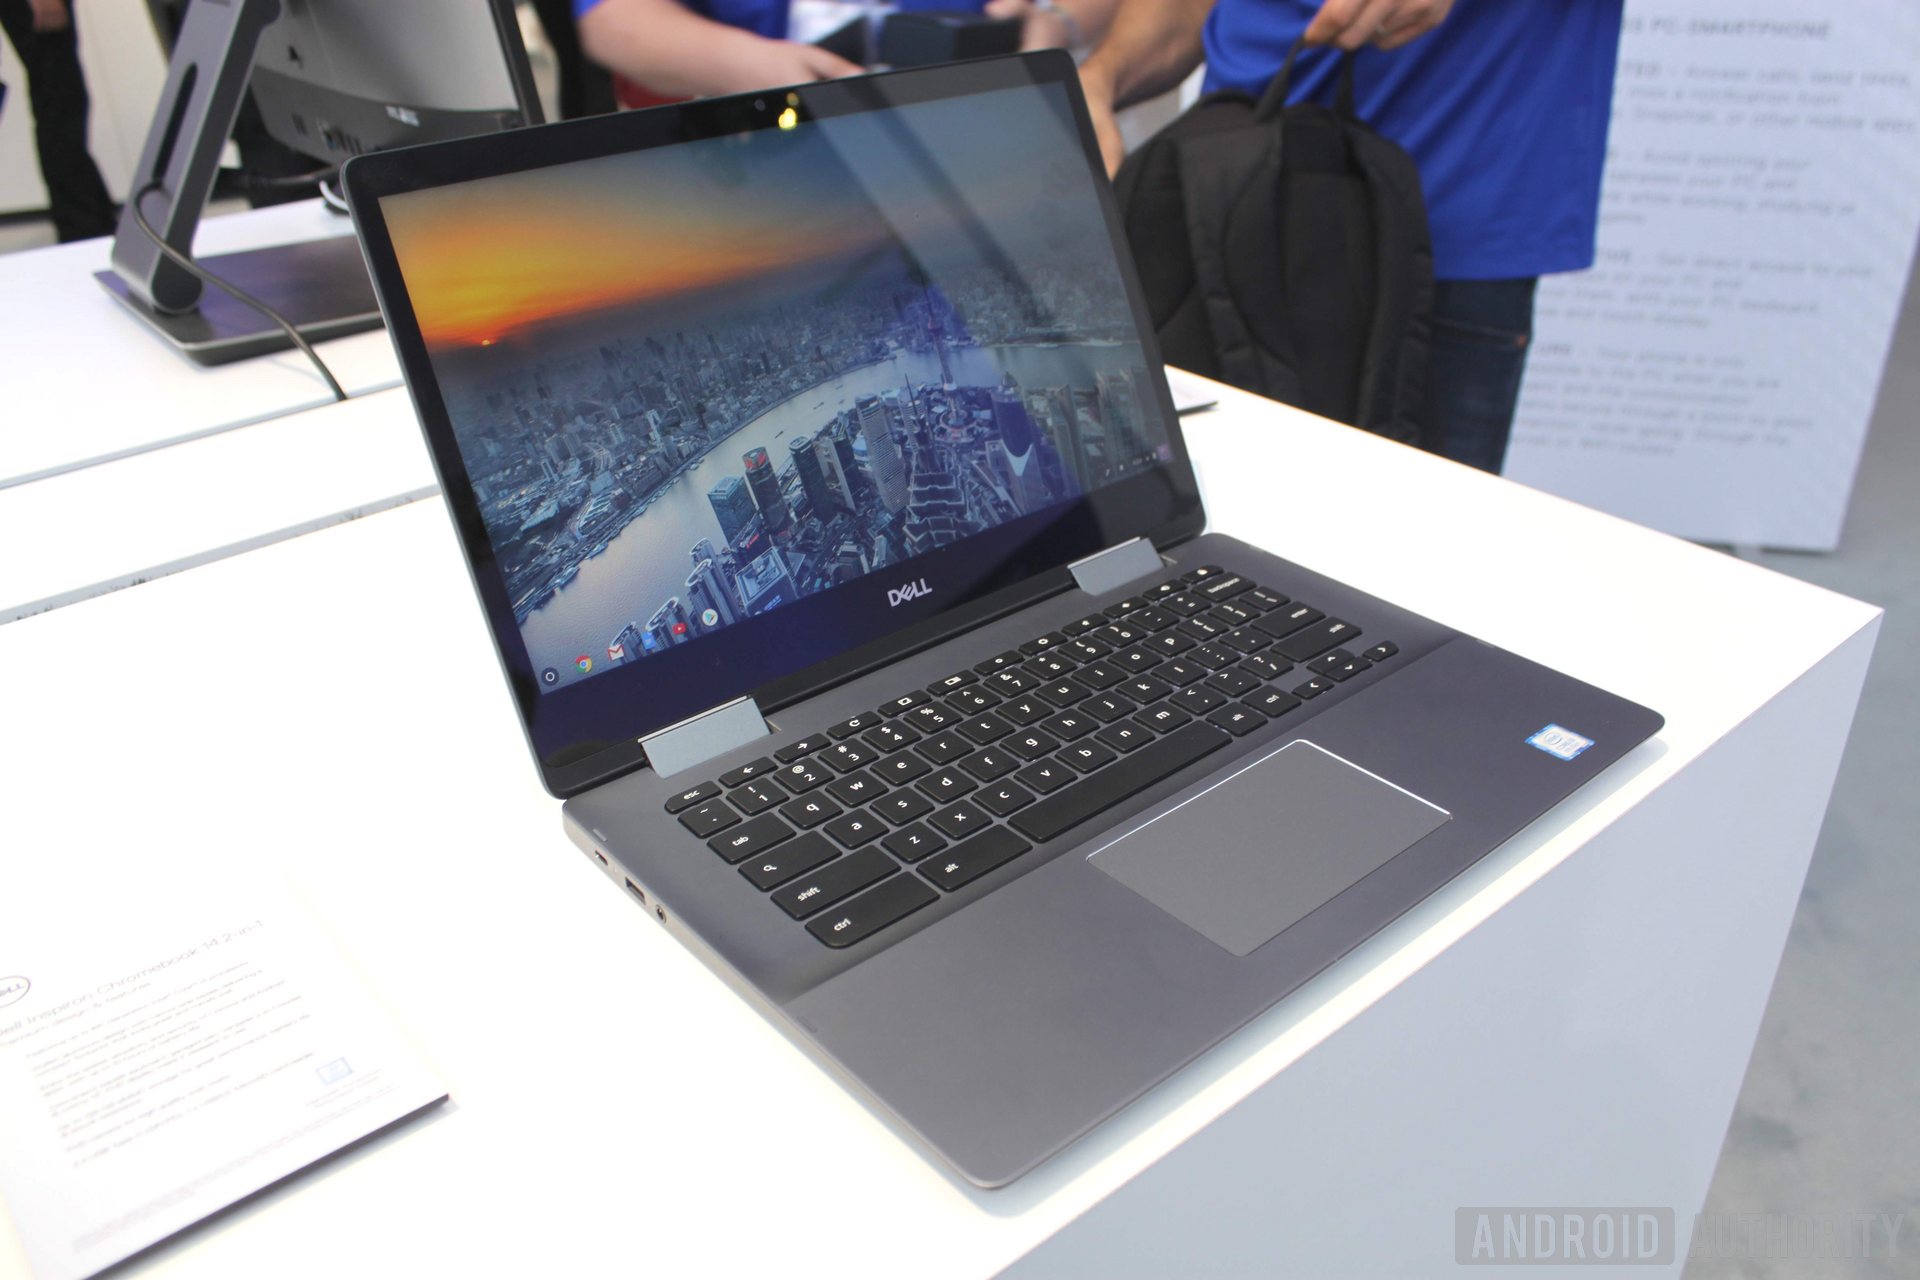 Windows on Chromebook - more than a pipedream now